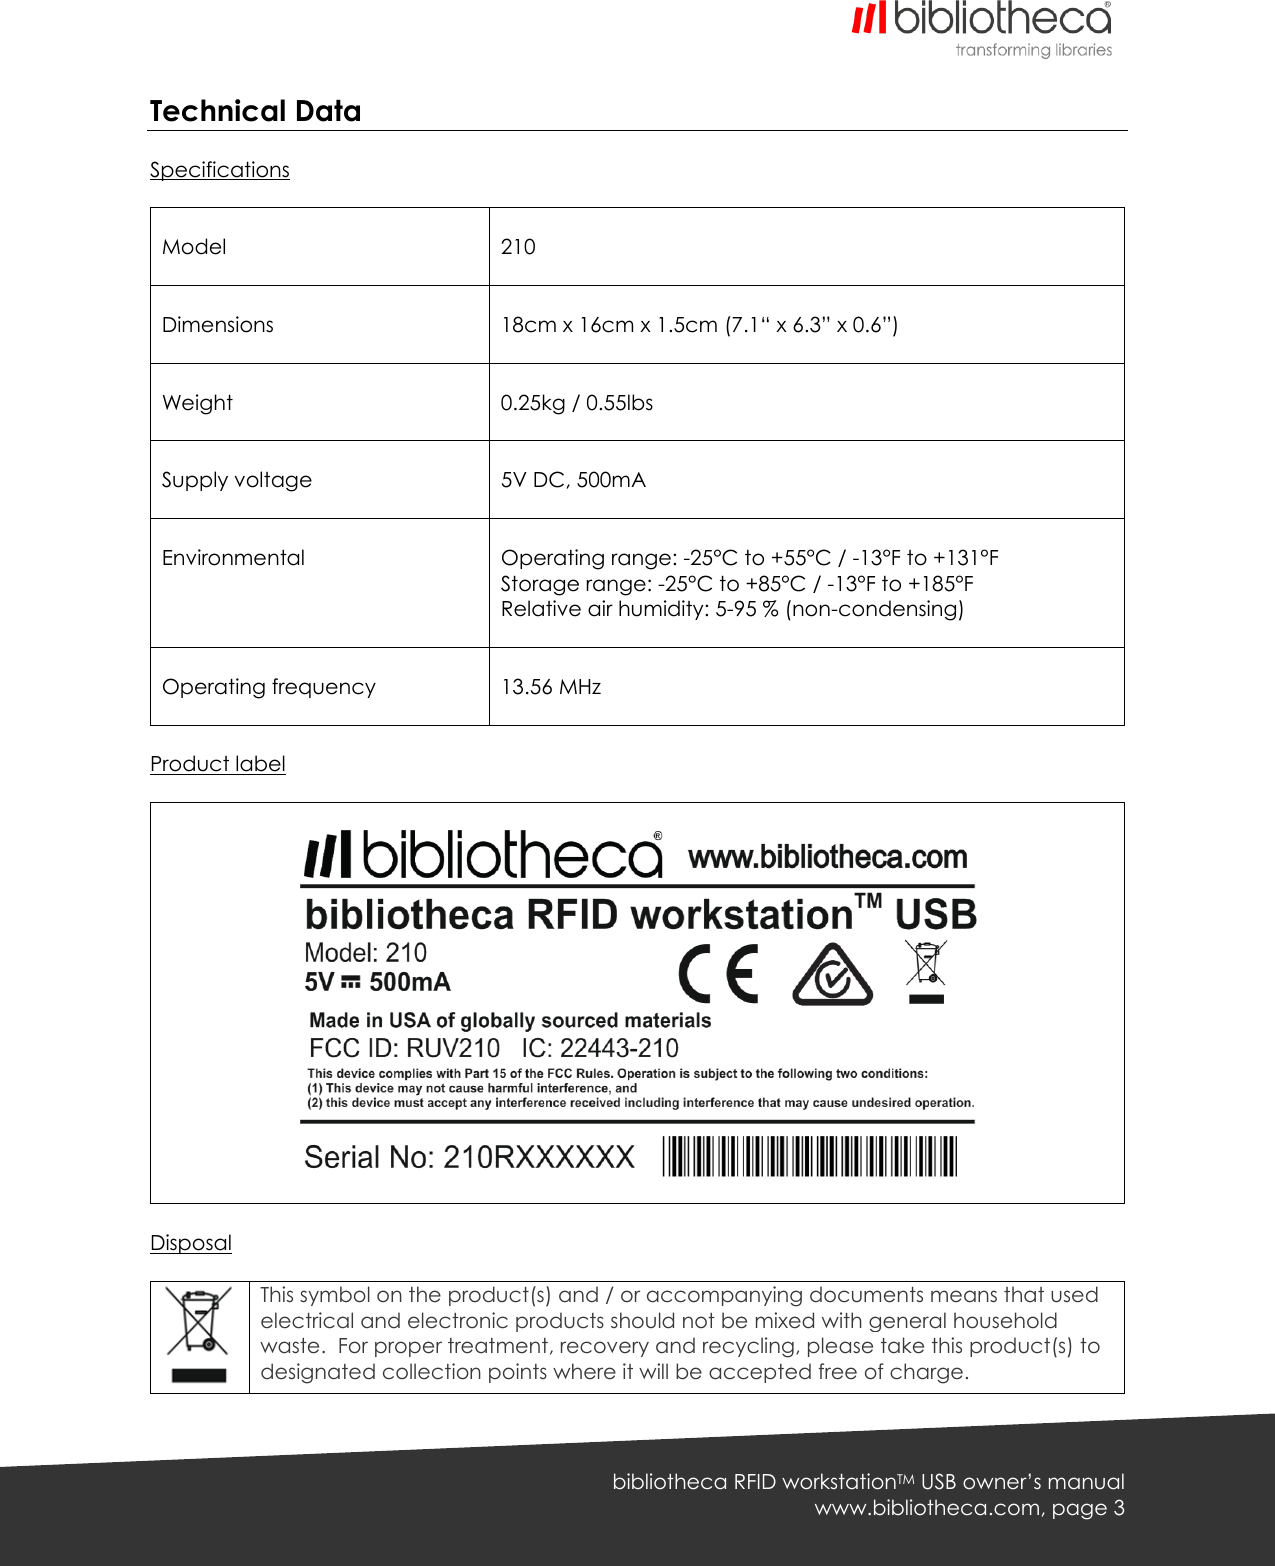   bibliotheca RFID workstationTM USB owner’s manual www.bibliotheca.com, page 3 Technical Data  Specifications   Model   210  Dimensions   18cm x 16cm x 1.5cm (7.1“ x 6.3” x 0.6”)  Weight   0.25kg / 0.55lbs  Supply voltage   5V DC, 500mA  Environmental     Operating range: -25°C to +55°C / -13°F to +131°F Storage range: -25°C to +85°C / -13°F to +185°F Relative air humidity: 5-95 % (non-condensing)   Operating frequency   13.56 MHz  Product label      Disposal   This symbol on the product(s) and / or accompanying documents means that used electrical and electronic products should not be mixed with general household waste.  For proper treatment, recovery and recycling, please take this product(s) to designated collection points where it will be accepted free of charge. 